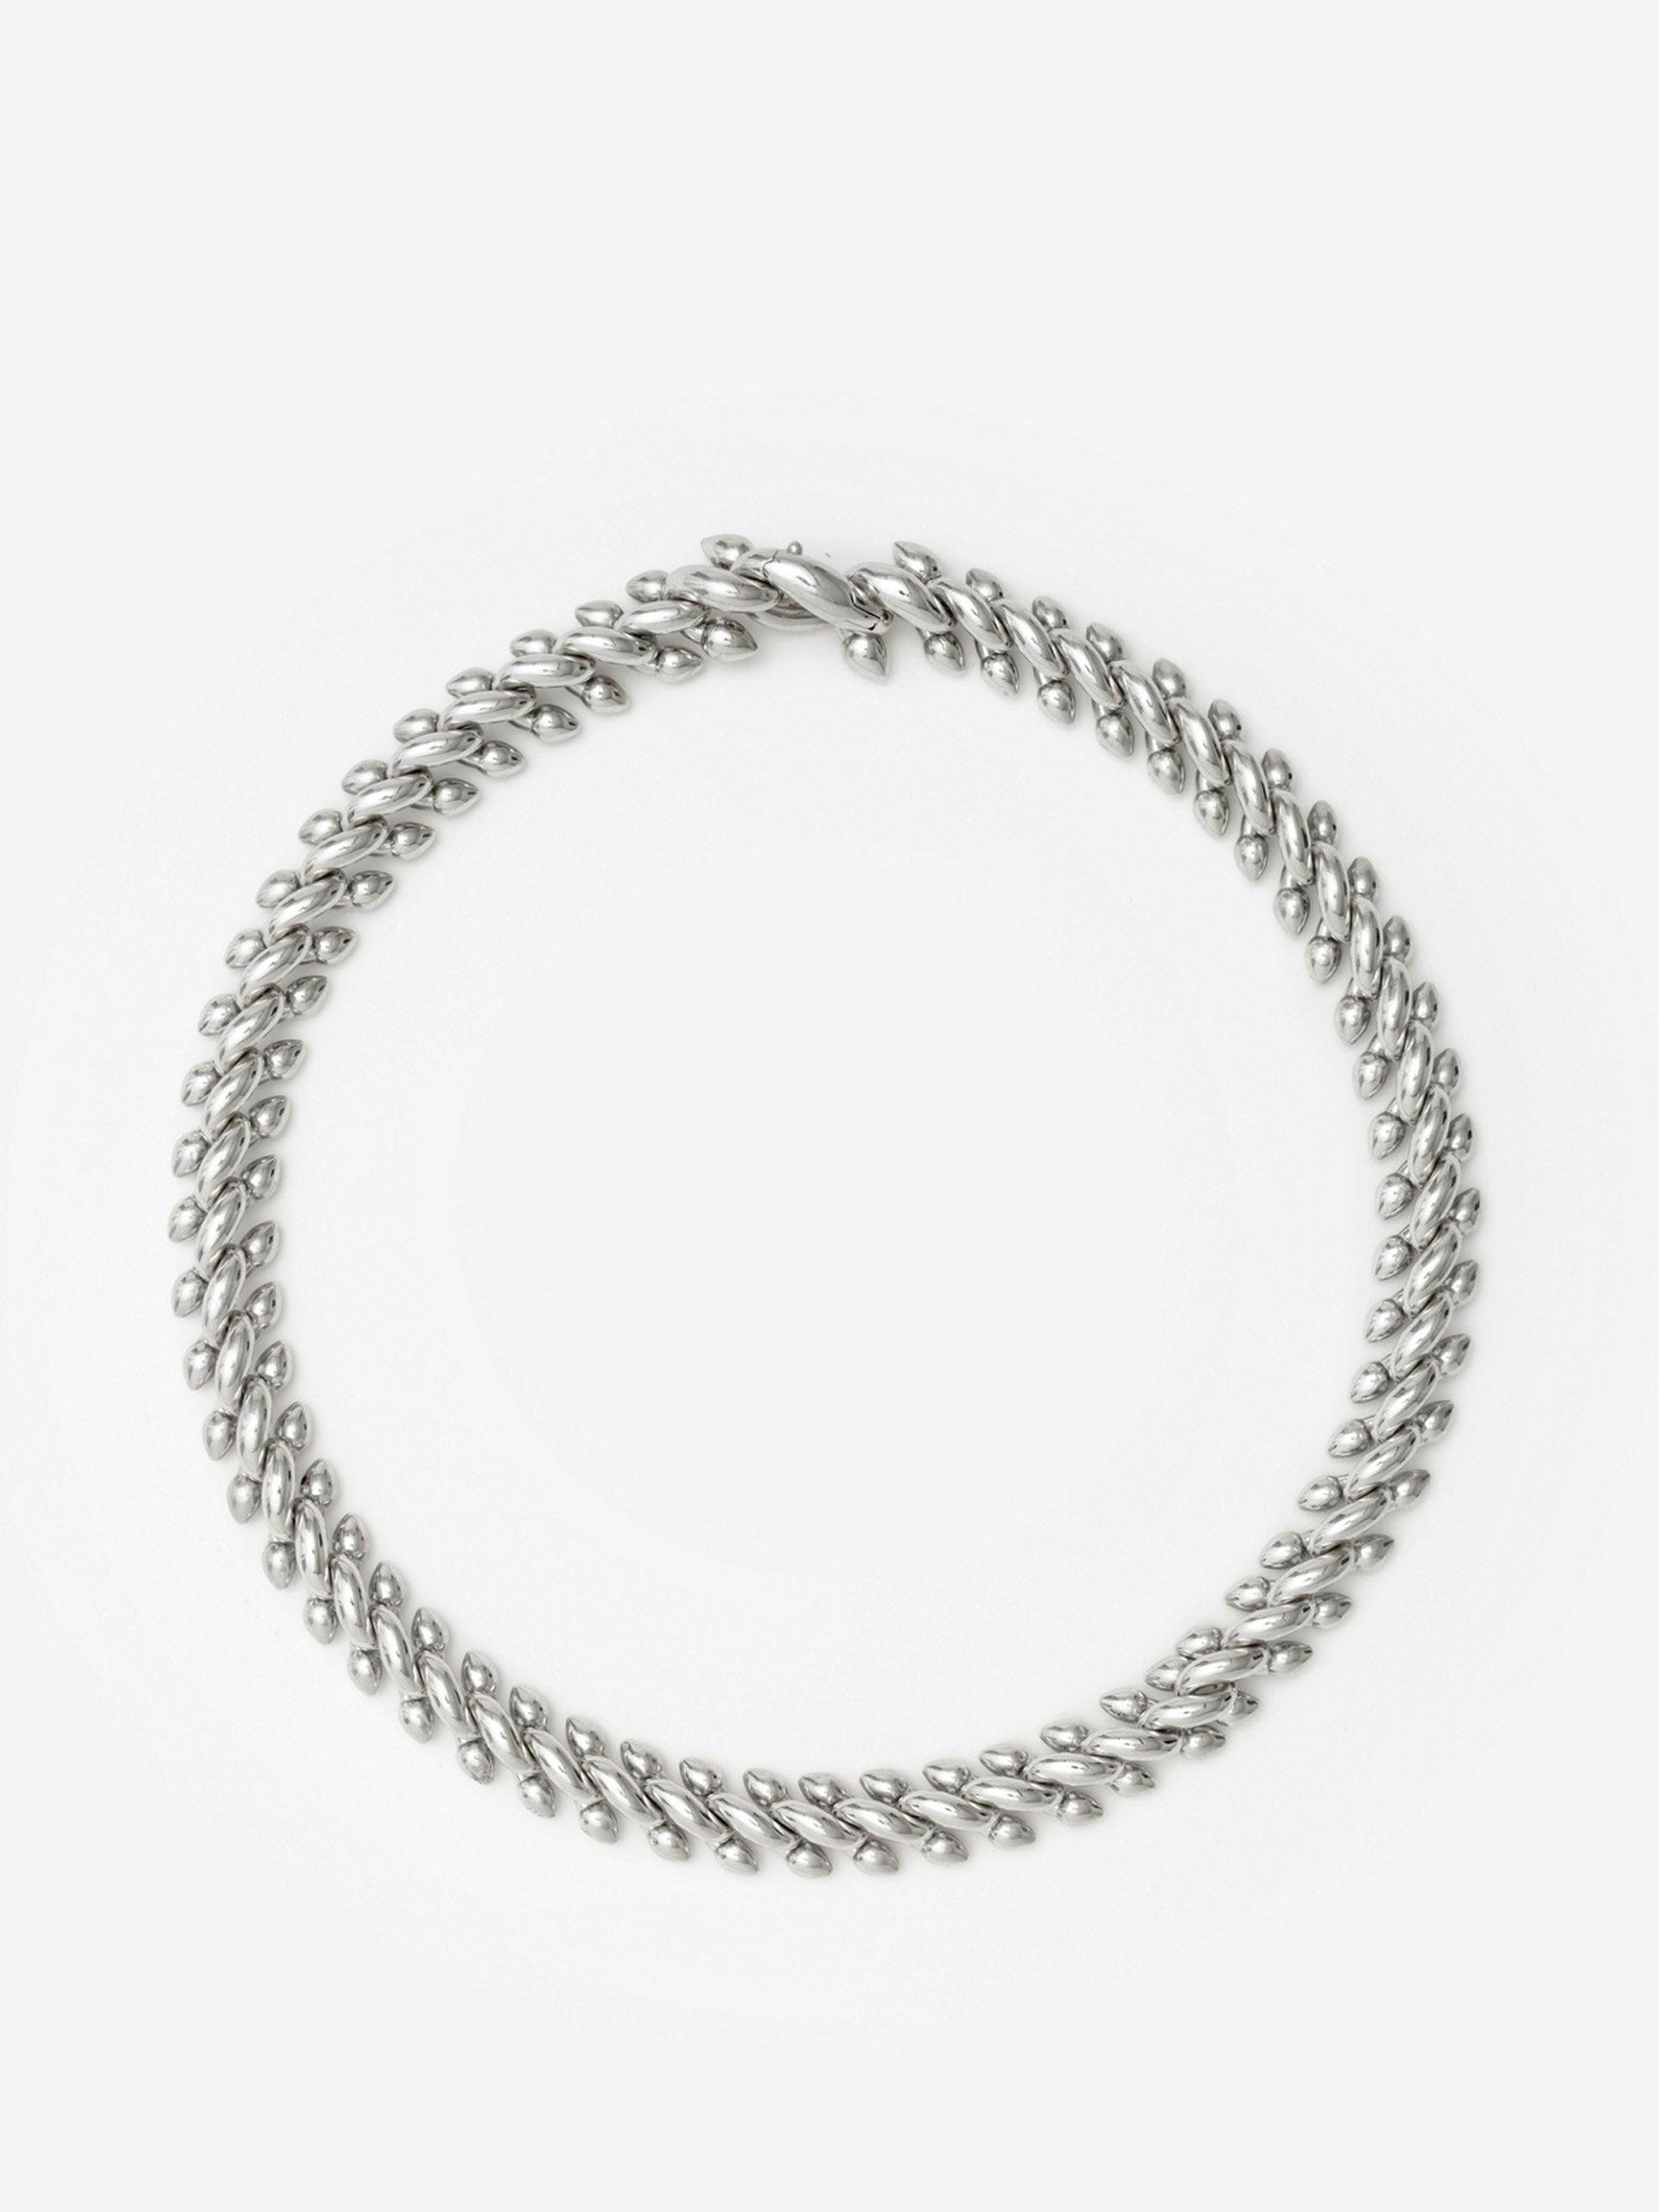 Silver spear chain necklace